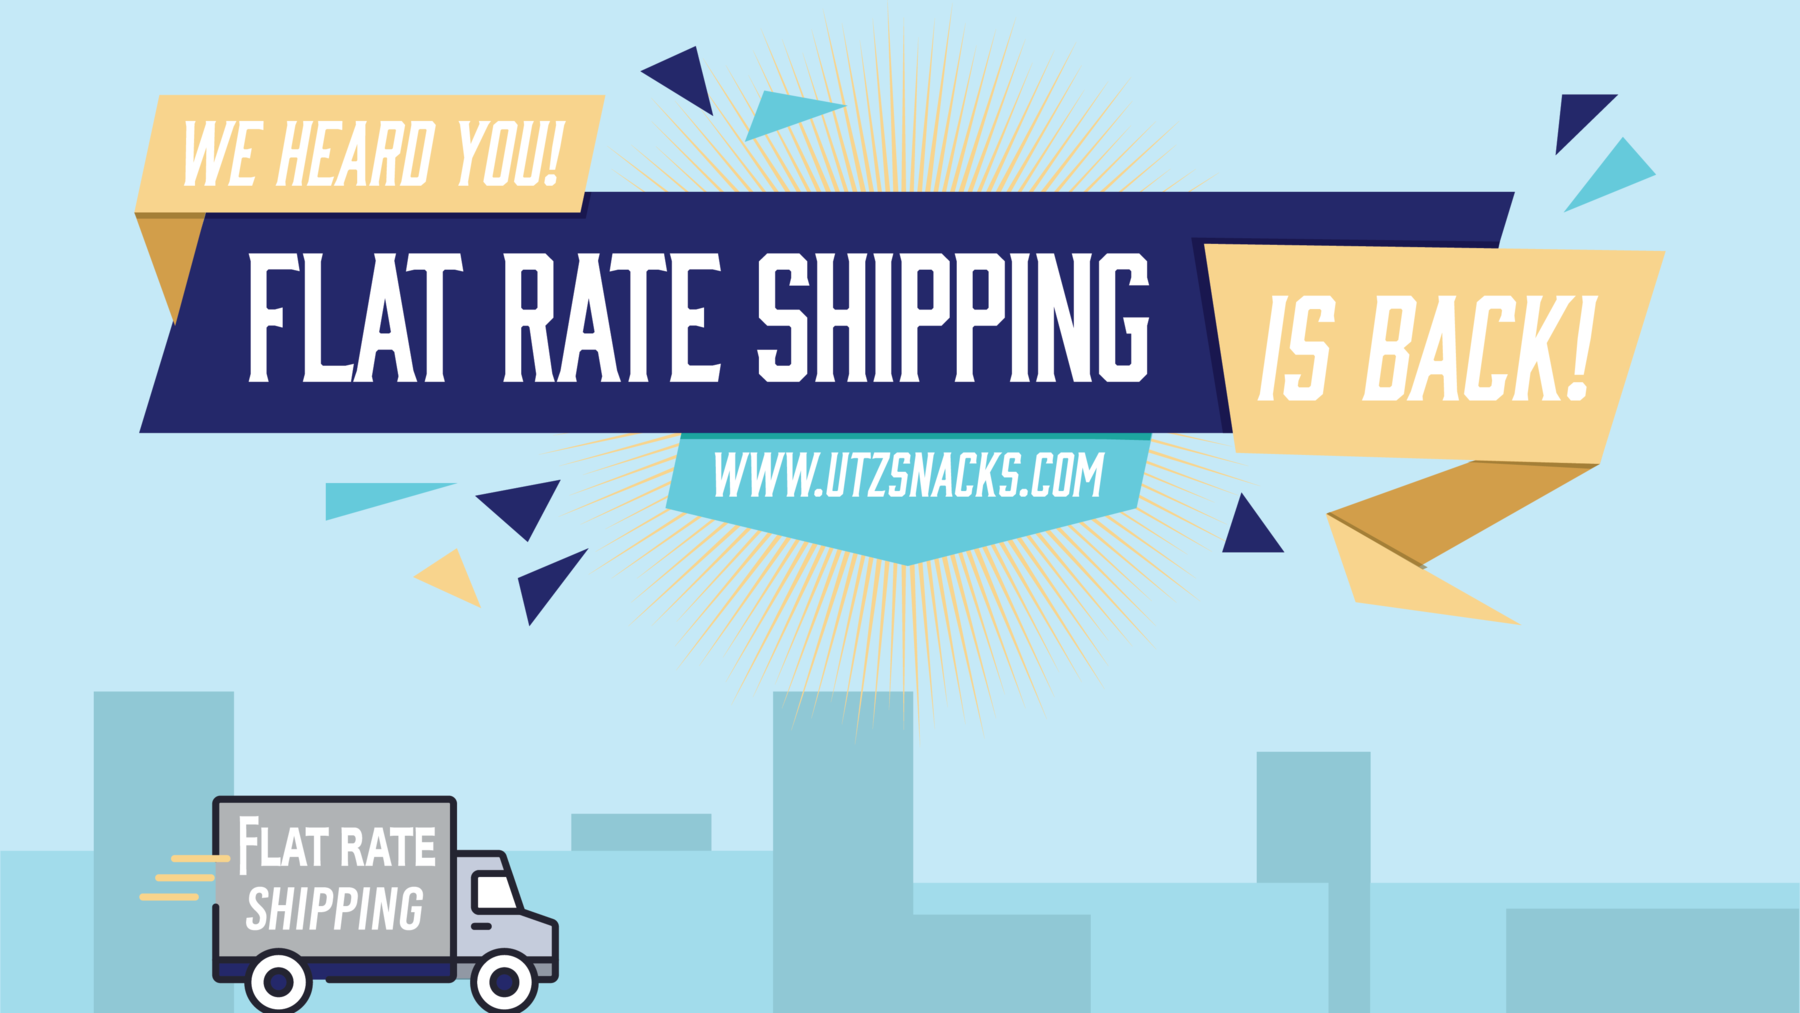 We Heard You! Flat Rate Shipping is Back at www.utzsnacks.com!